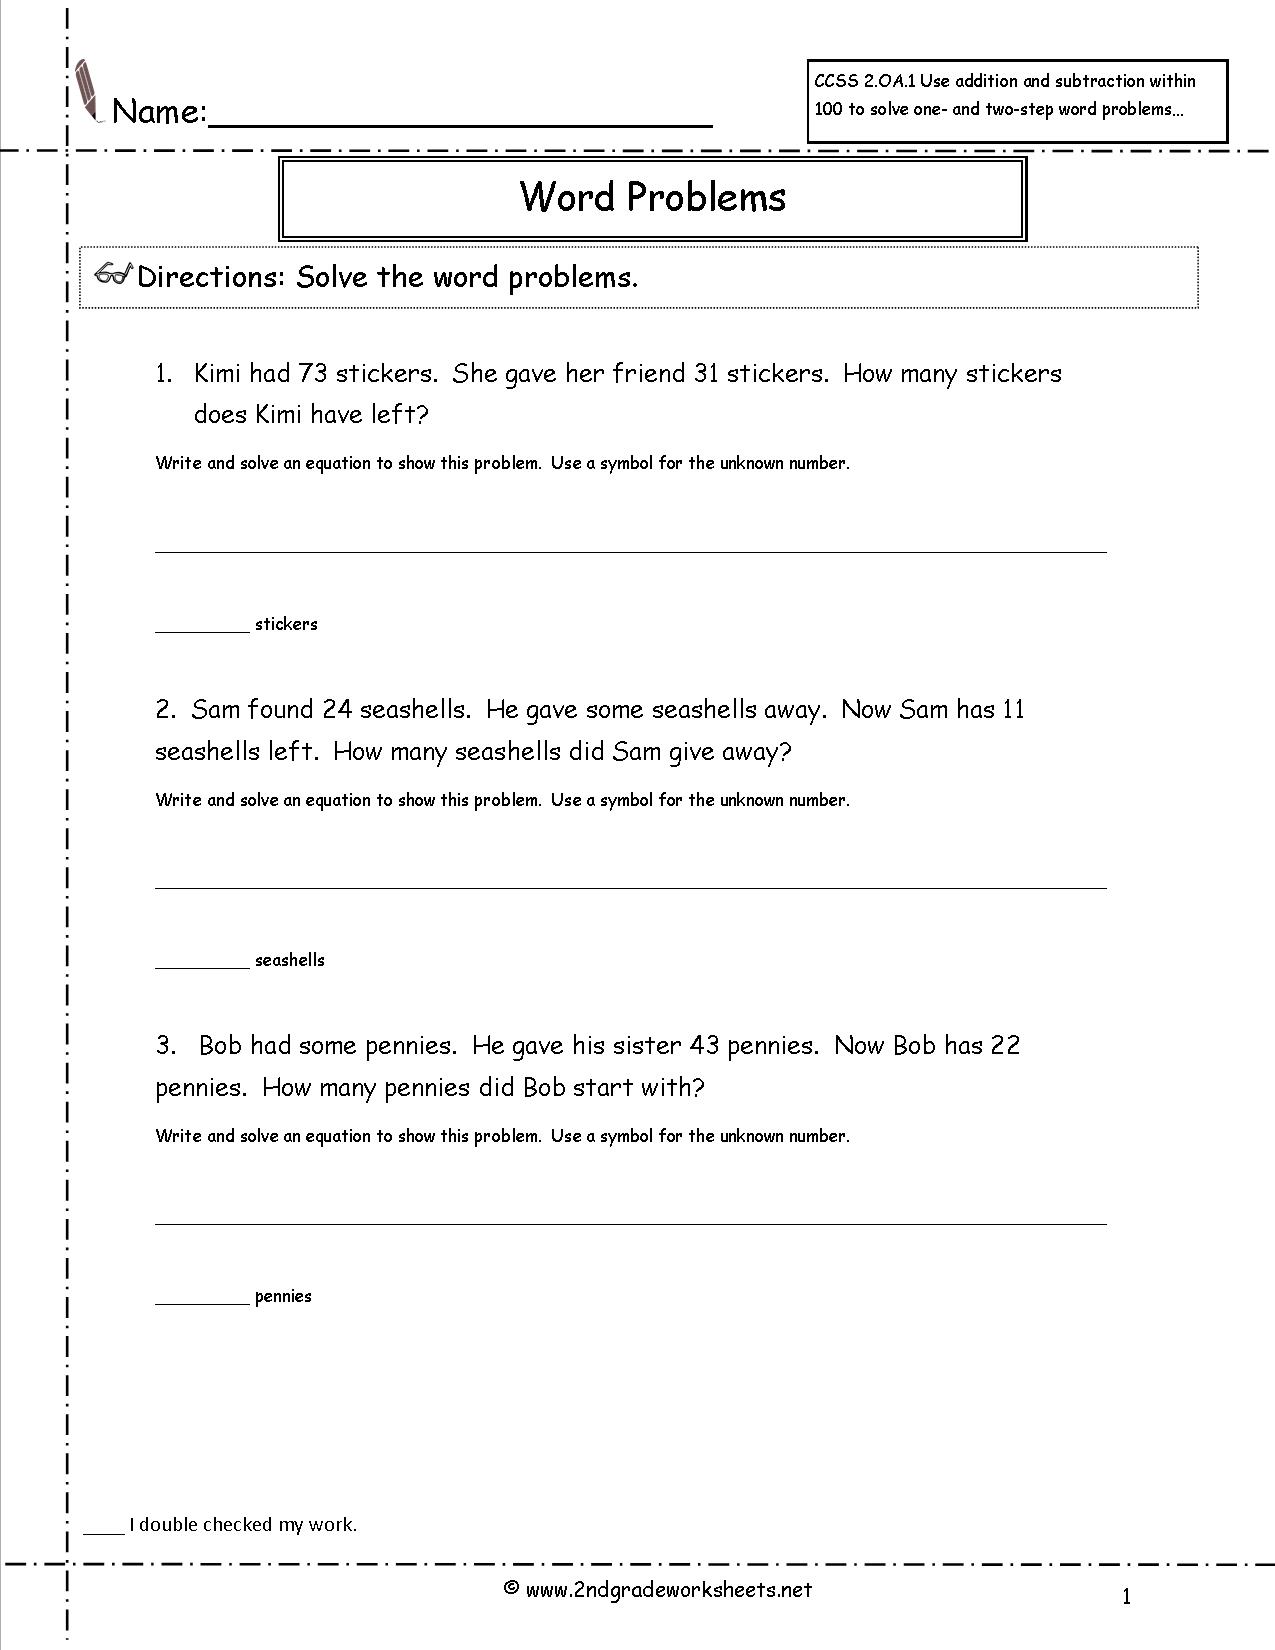 Ccss 2 Oa 1 Worksheets Addition And Subtraction Word Problems Ks2